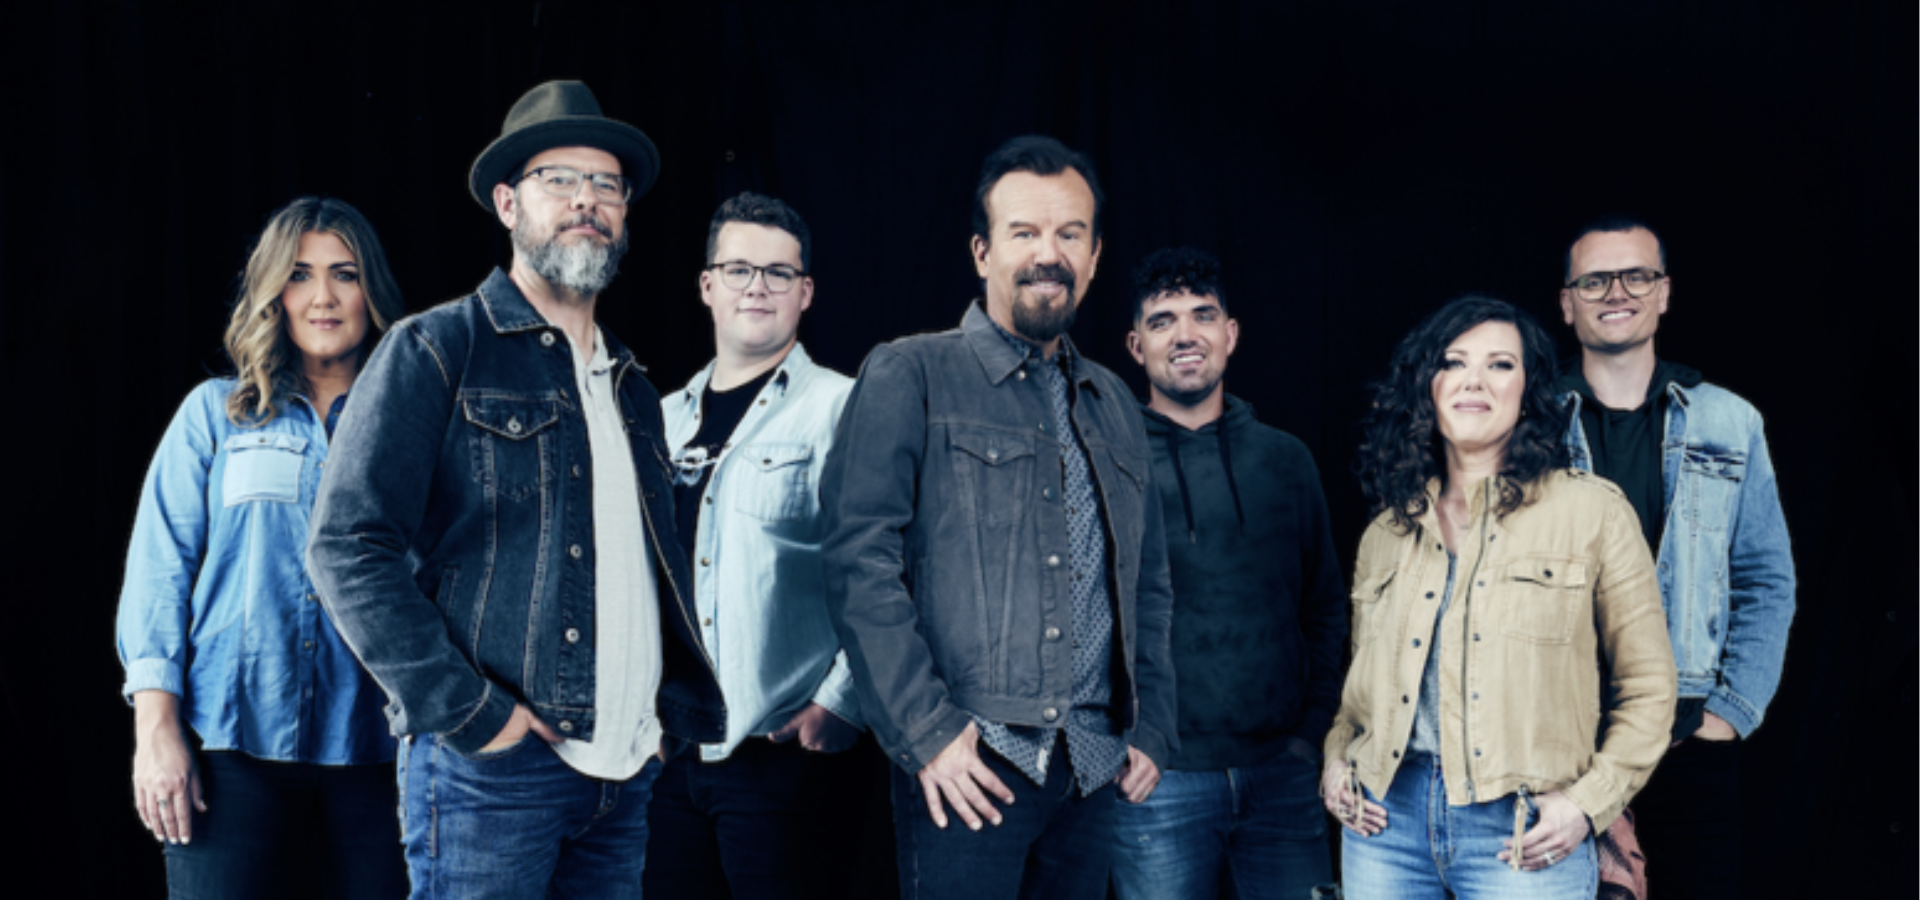 Casting Crowns Celebrates 20 Years As A Band With Album, Tour & Film